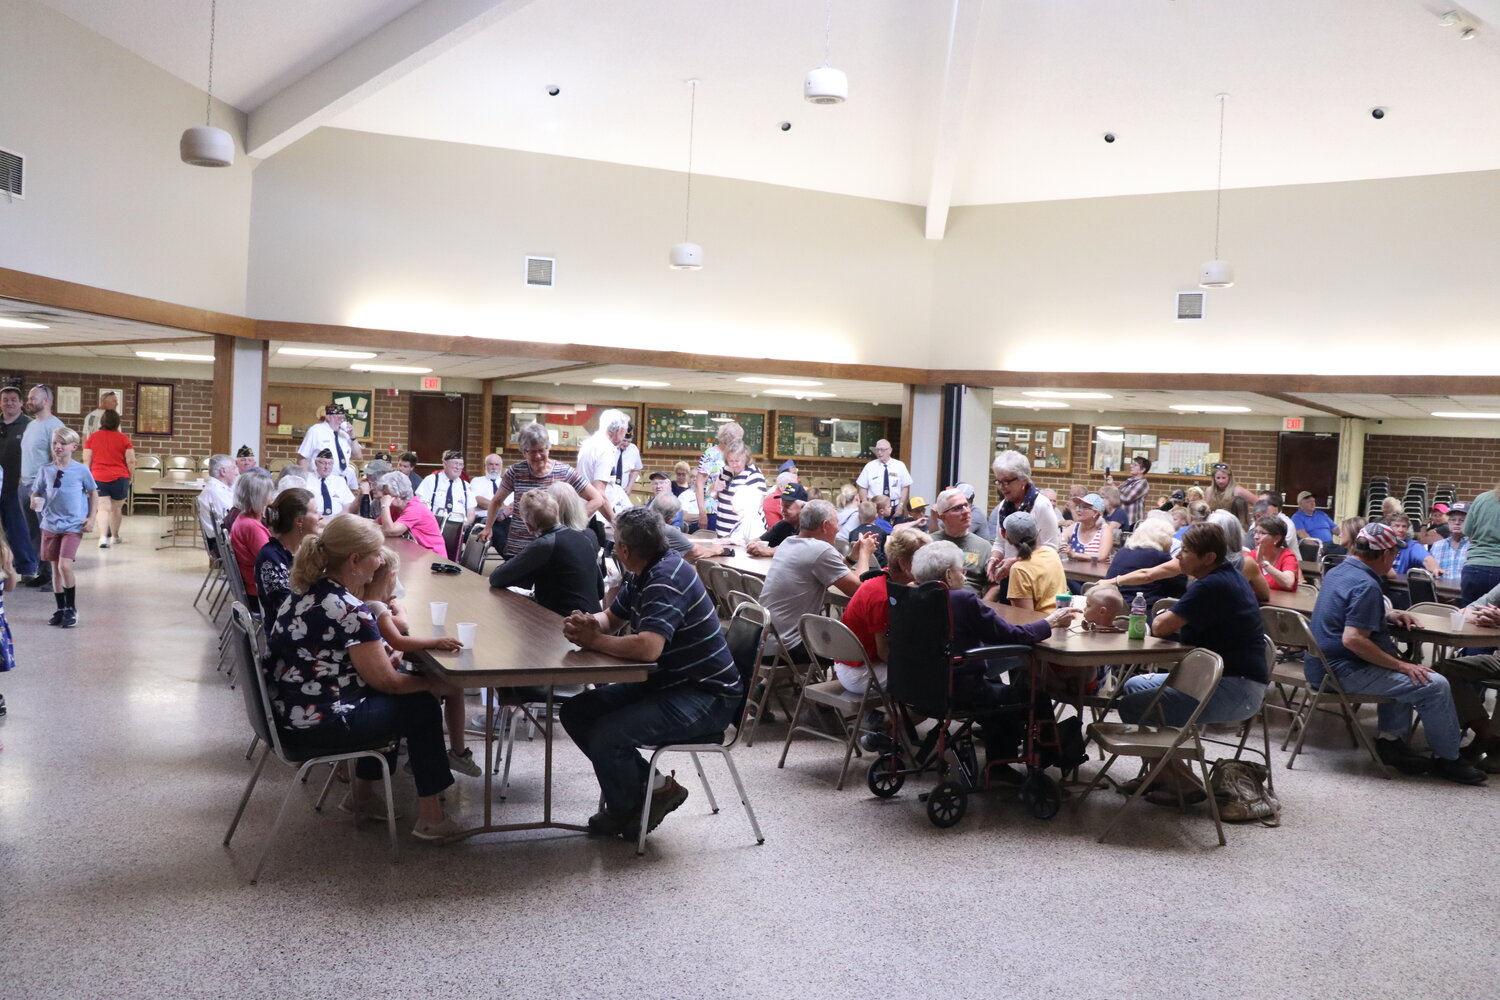 Lone Tree residents pack the American Legion to enjoy donuts and other treats before the Memorial Day speakers arrive at the podium.